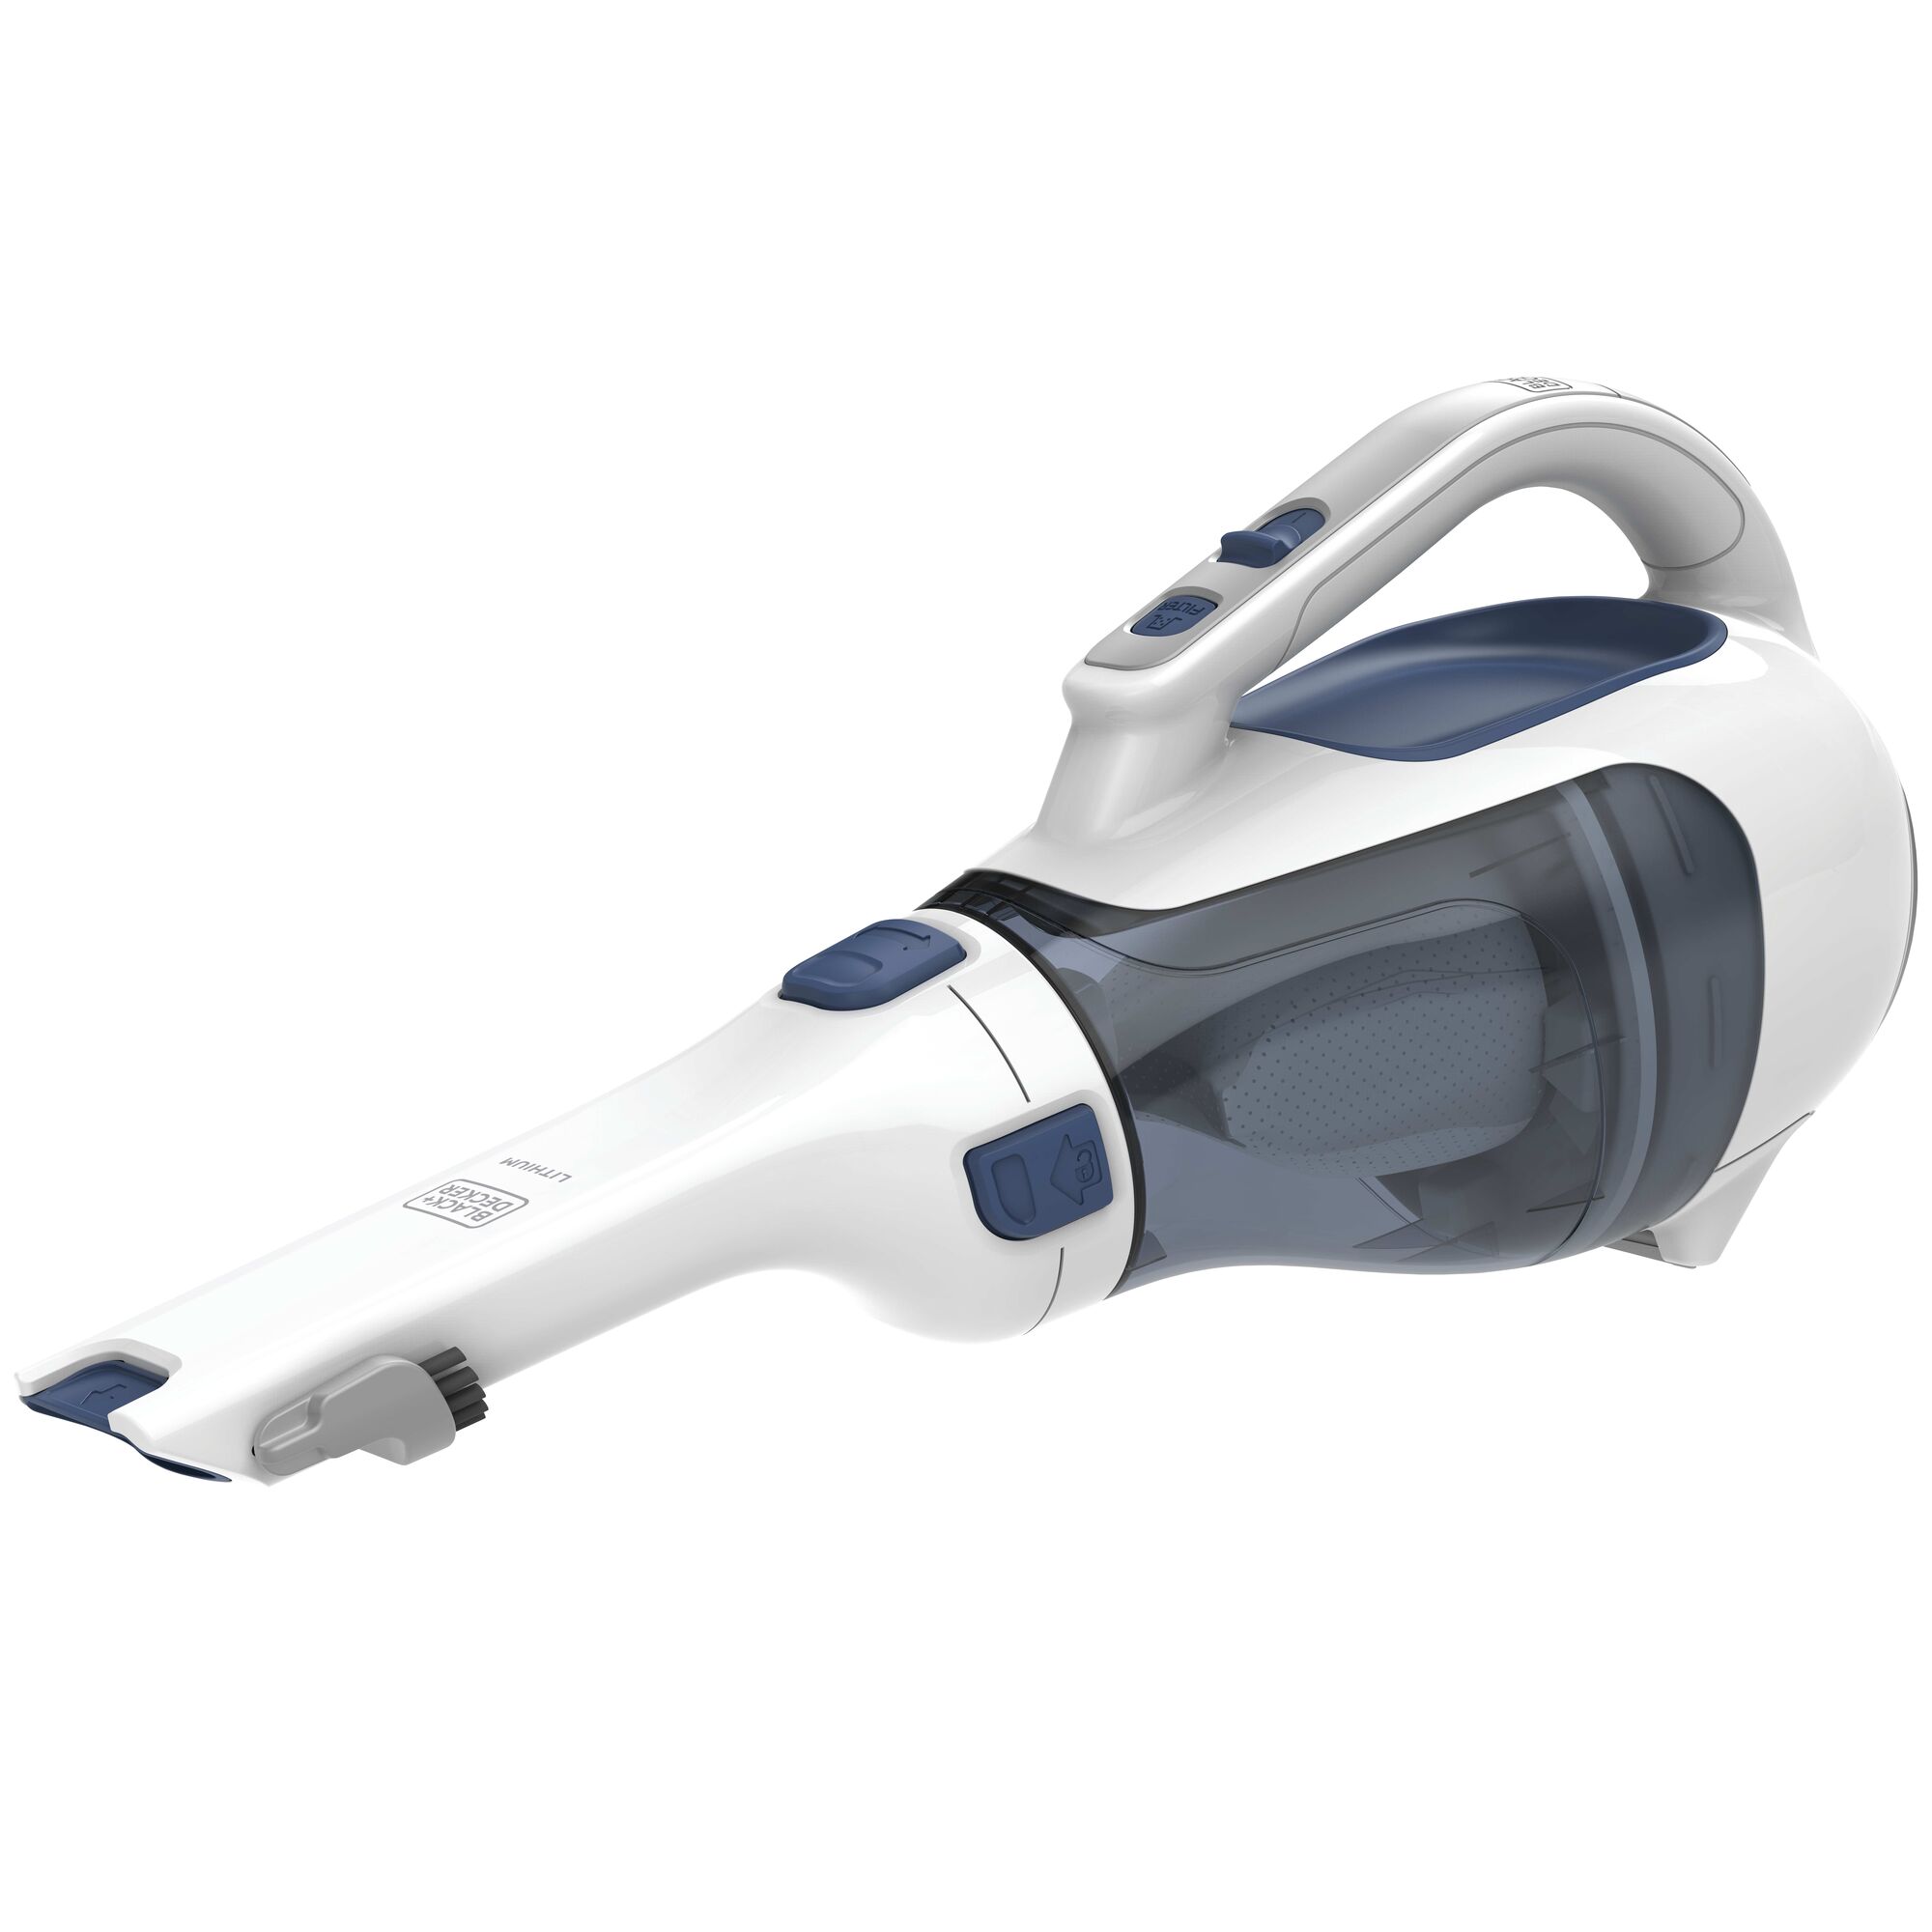 Dustbuster Cordless Hand Vacuum Ink Blue.